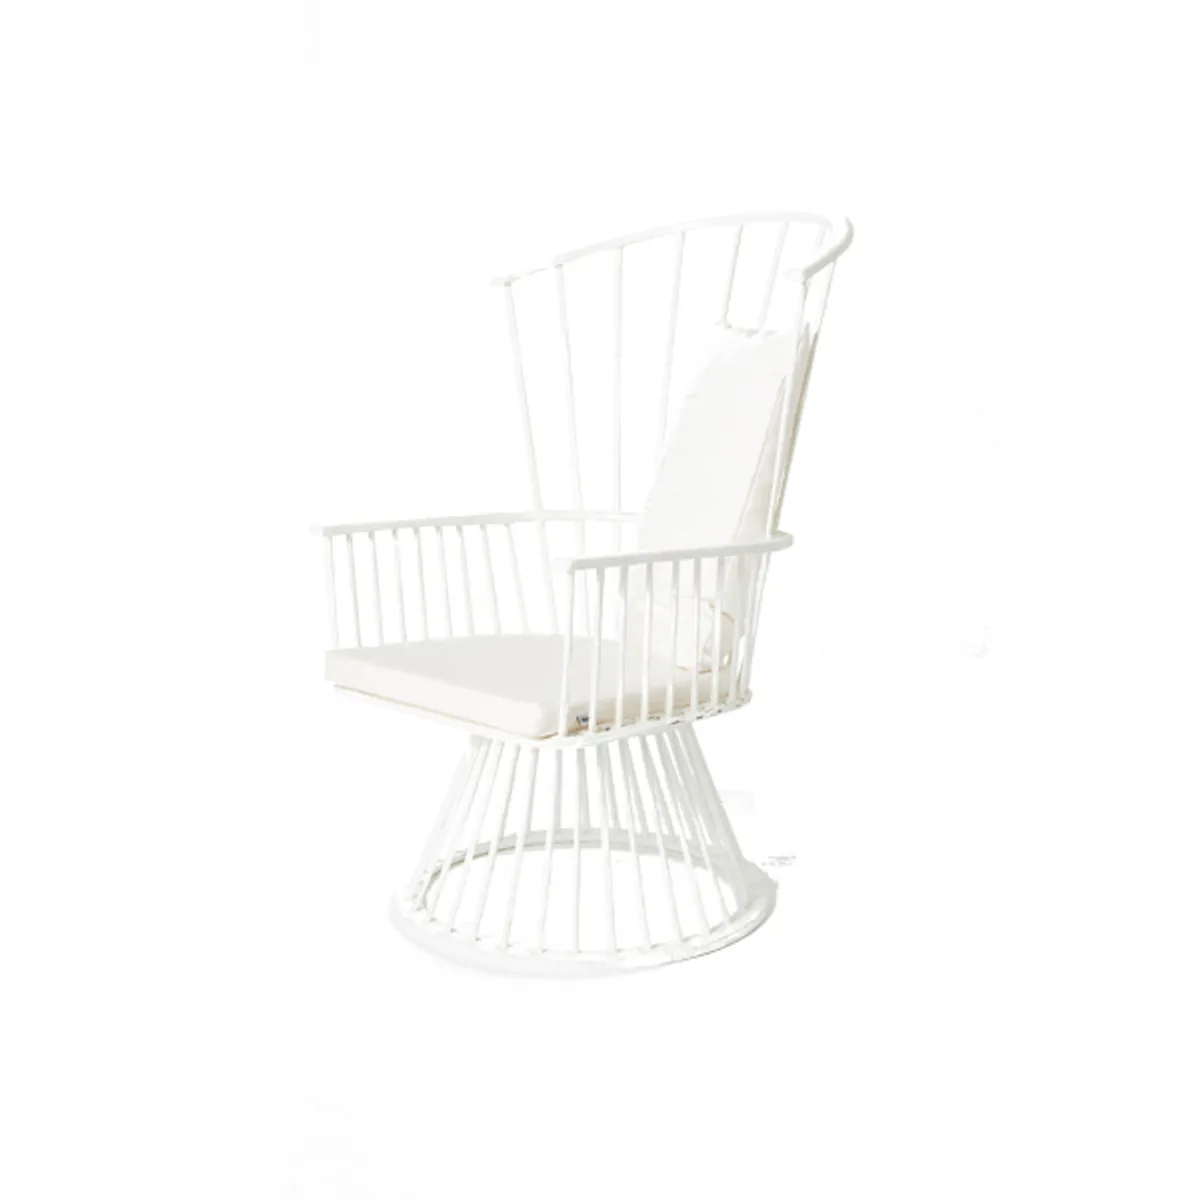 Cadizcagehighbackchair Inside Out Contracts2 copy